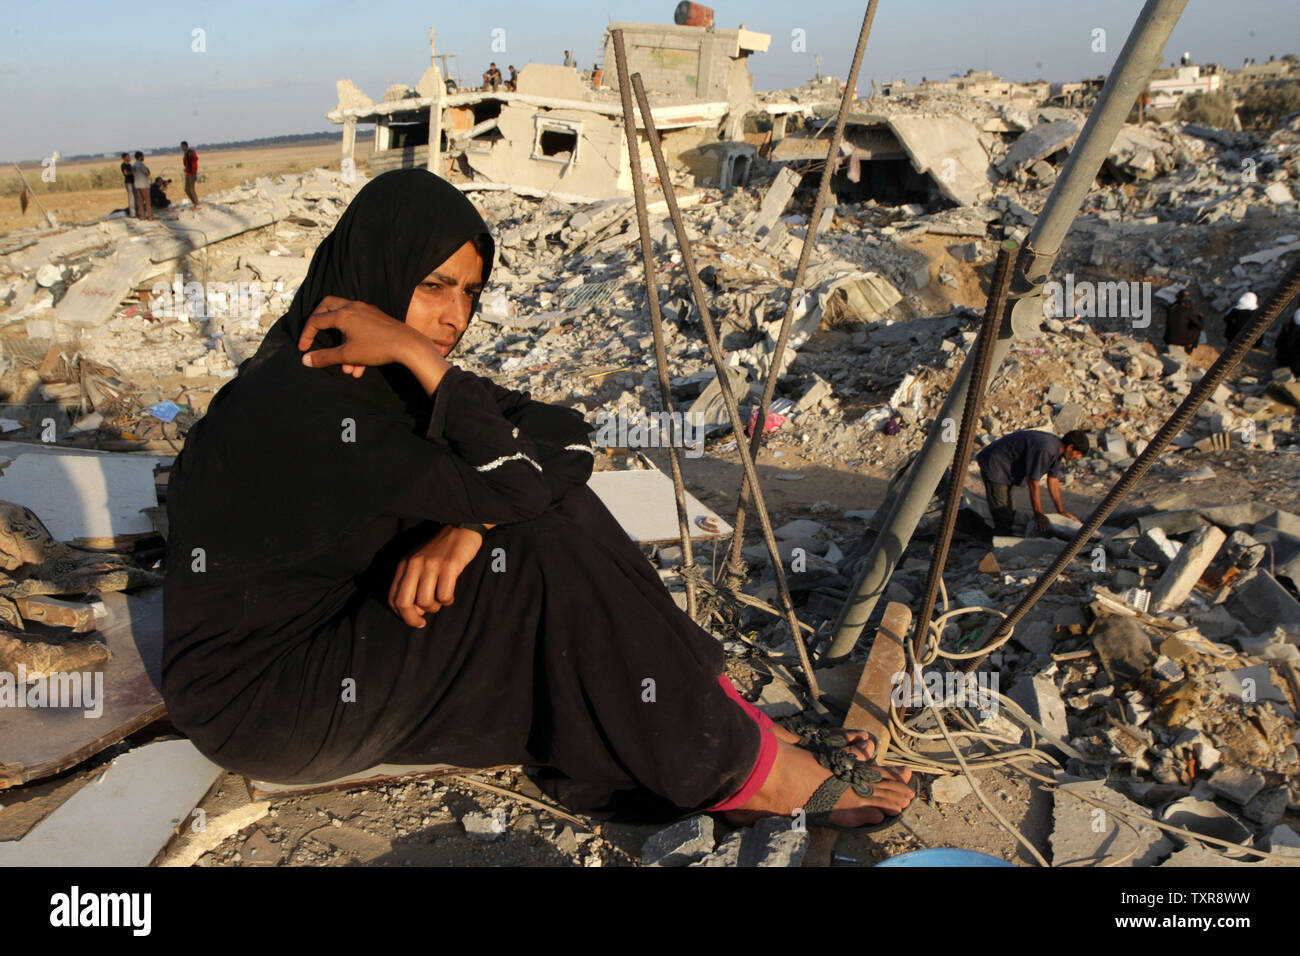 A palestinian woman sit  on the rubble of her home which was destroyed during the Israeli army summer's military offensive on the Gaza Strip, on October 1, 2014, in Khan Yunis' Khuzaa neighbourhood in the southern Gaza Strip. Israeli Prime Minister Benjamin Netanyahu has complained to UN chief Ban Ki-moon that a probe by the world body into the Gaza war is one-sided, his foreign ministry said. UPI/Ismael Mohamad Stock Photo